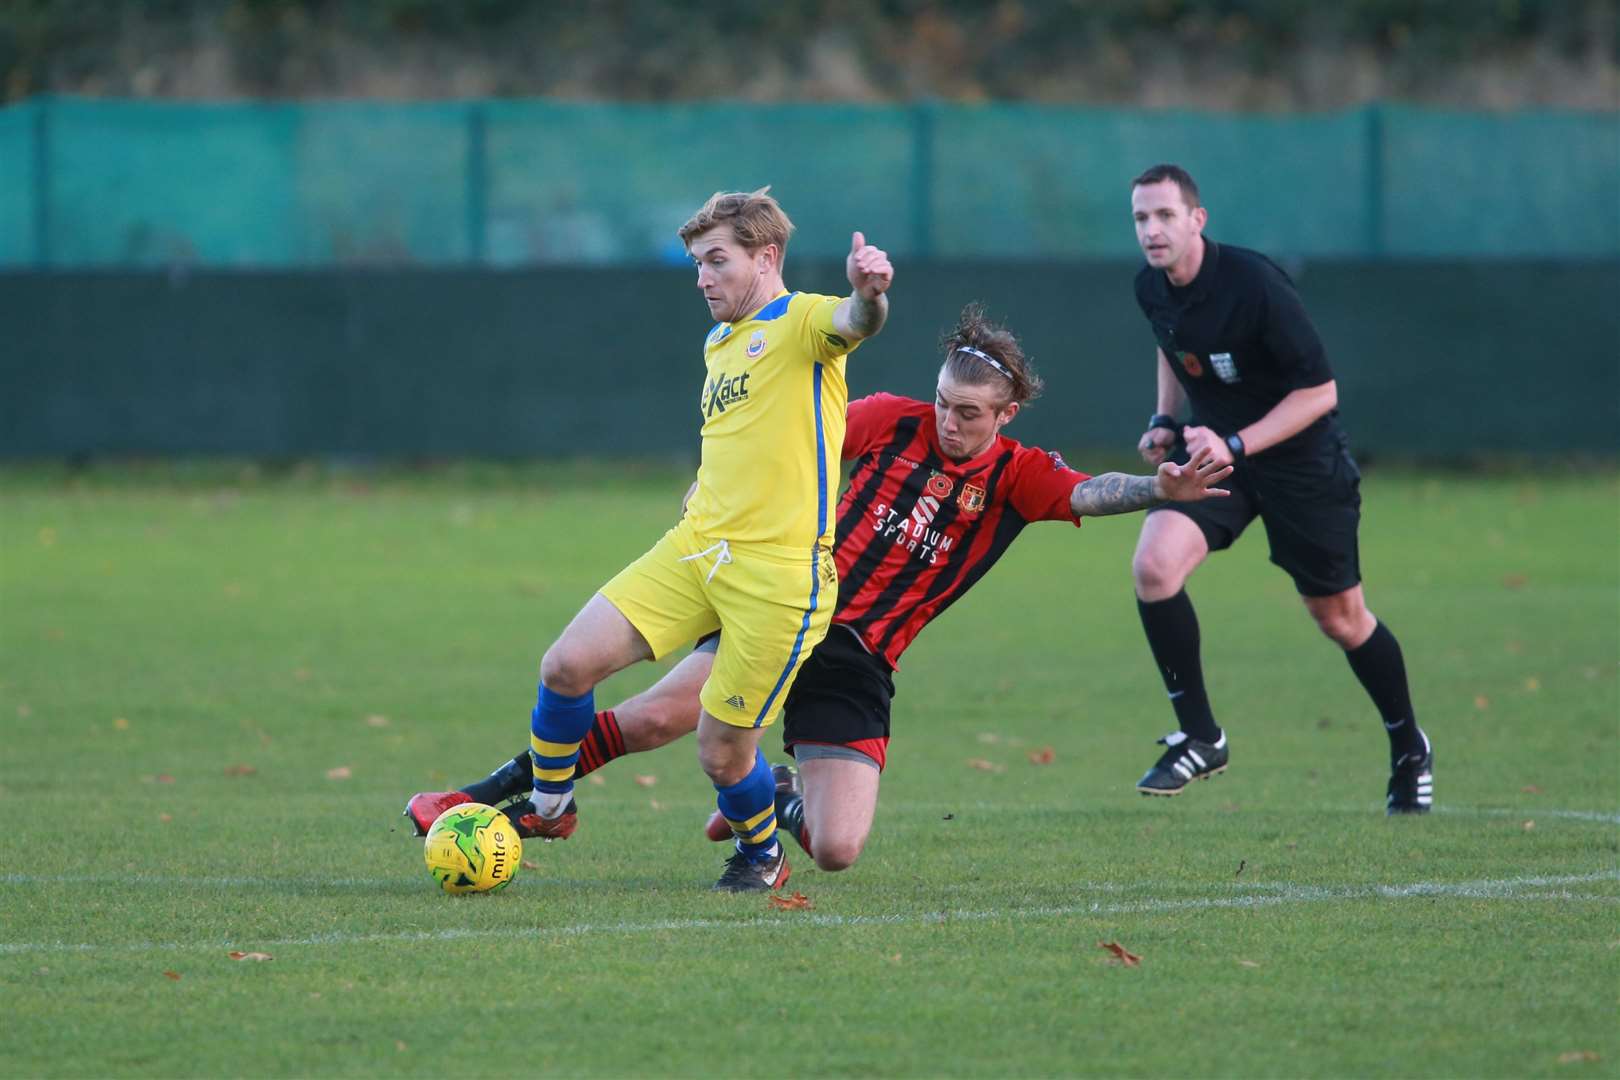 James Morrish on the ball for Whitstable. Picture by: John Westhrop